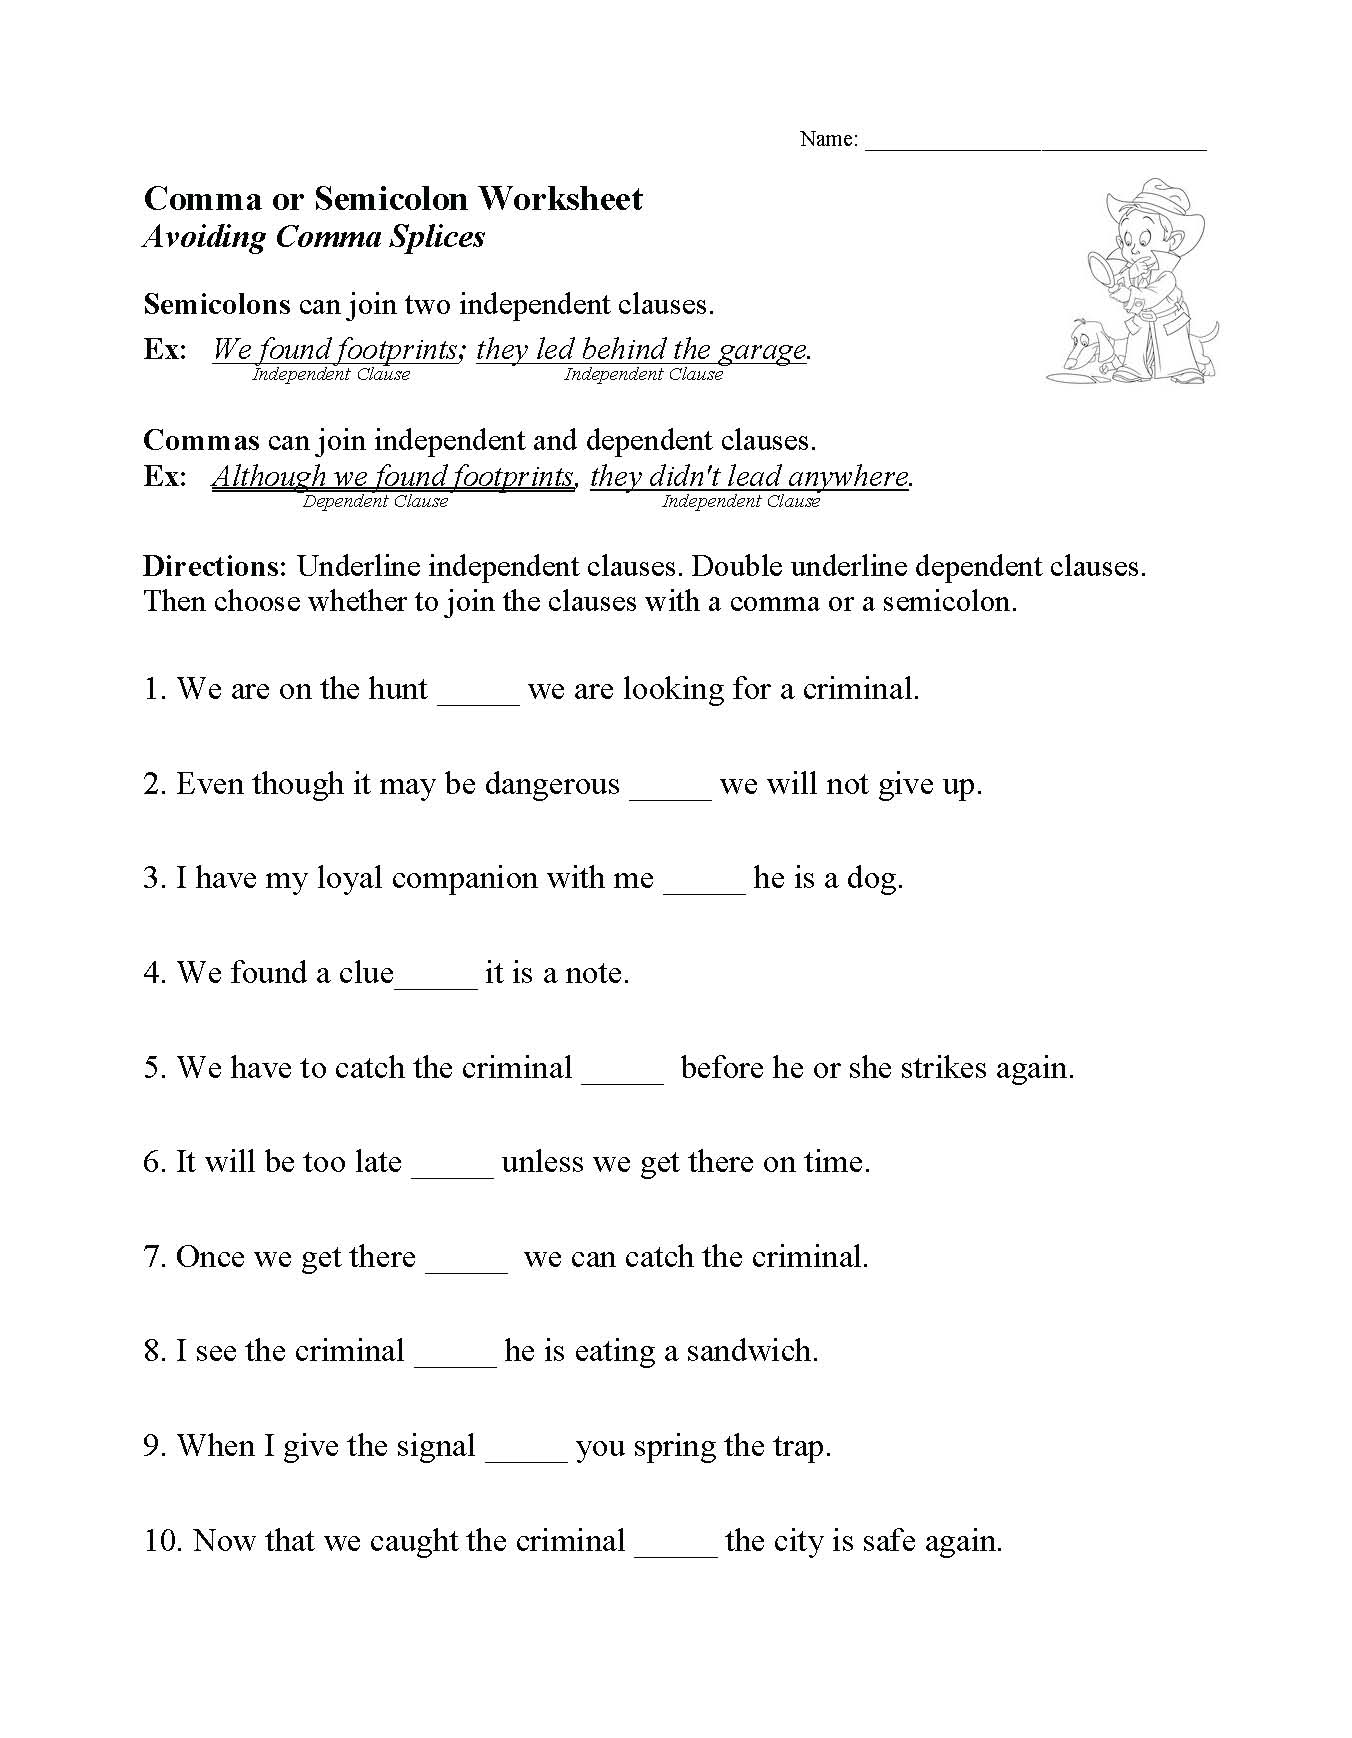 This is a preview image of our Comma or Semicolon Worksheet. Click on it to enlarge this image and view the source file.